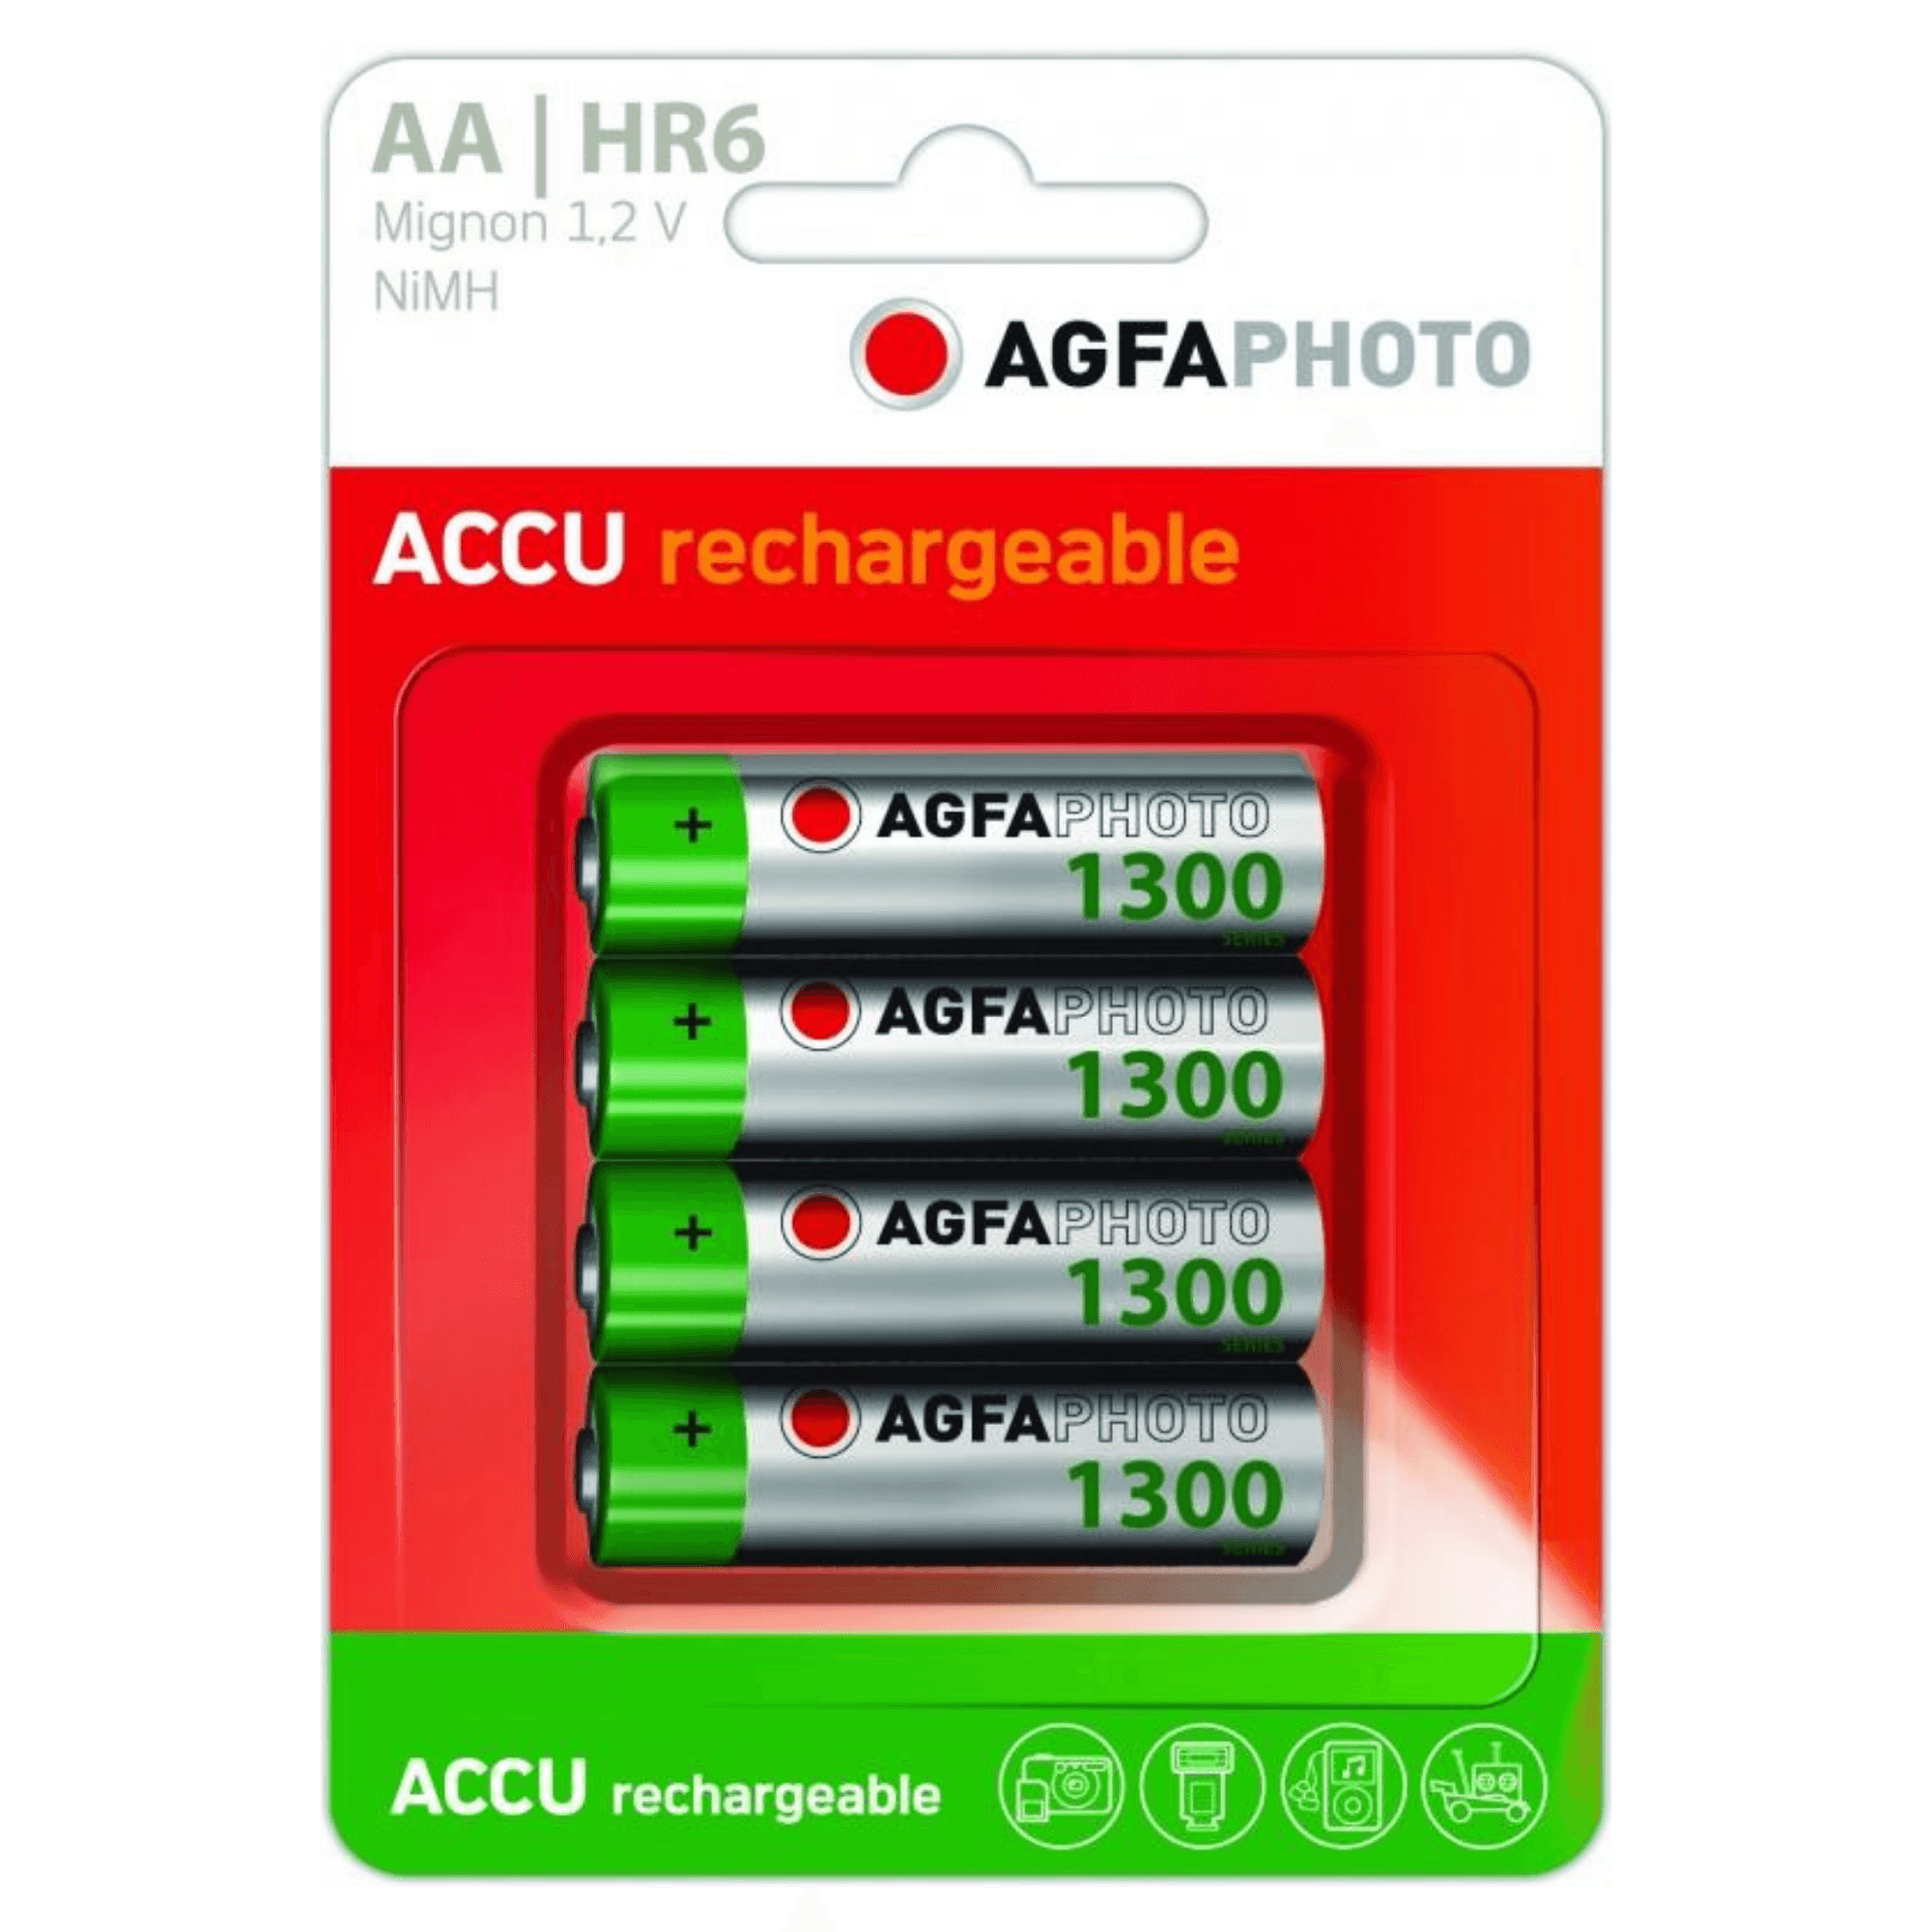 AgfaPhoto Rechargeable AA 1300 mAh Batteries | 4 Pack | HR6 - Choice Stores